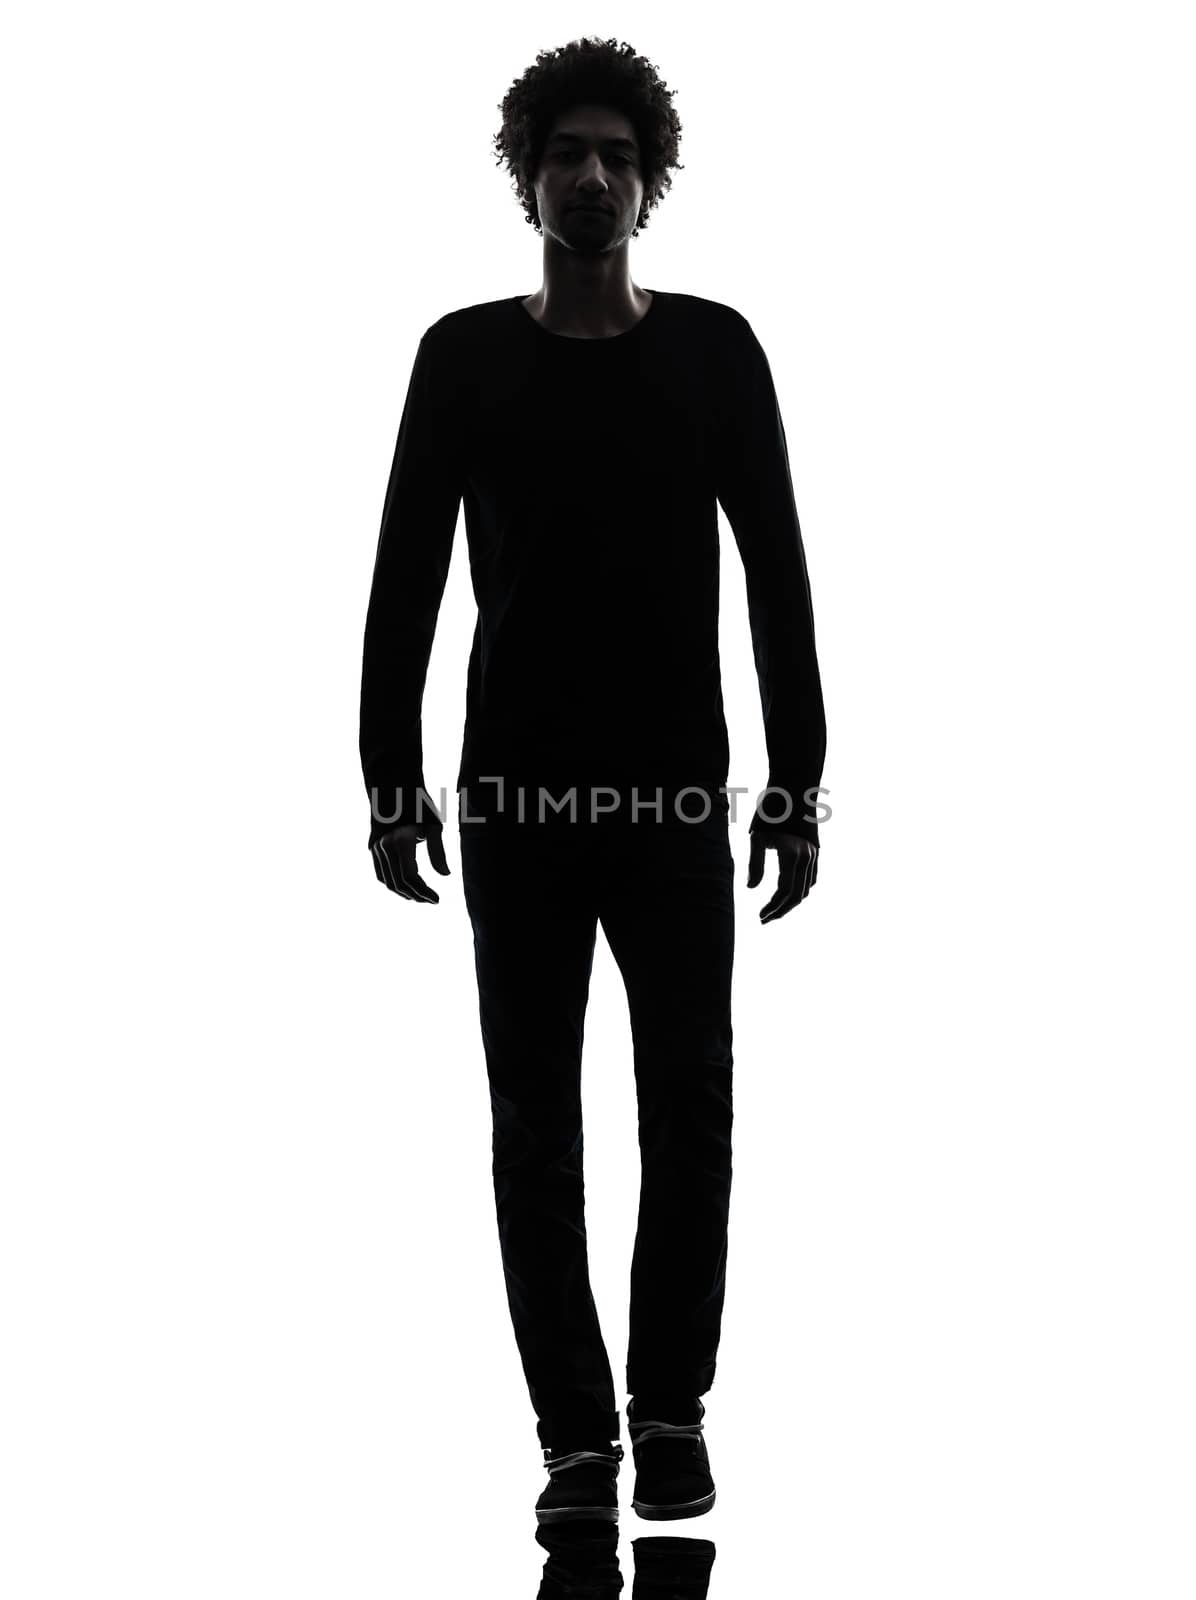 one african handsome young man walking in silhouette studio isolated on white background